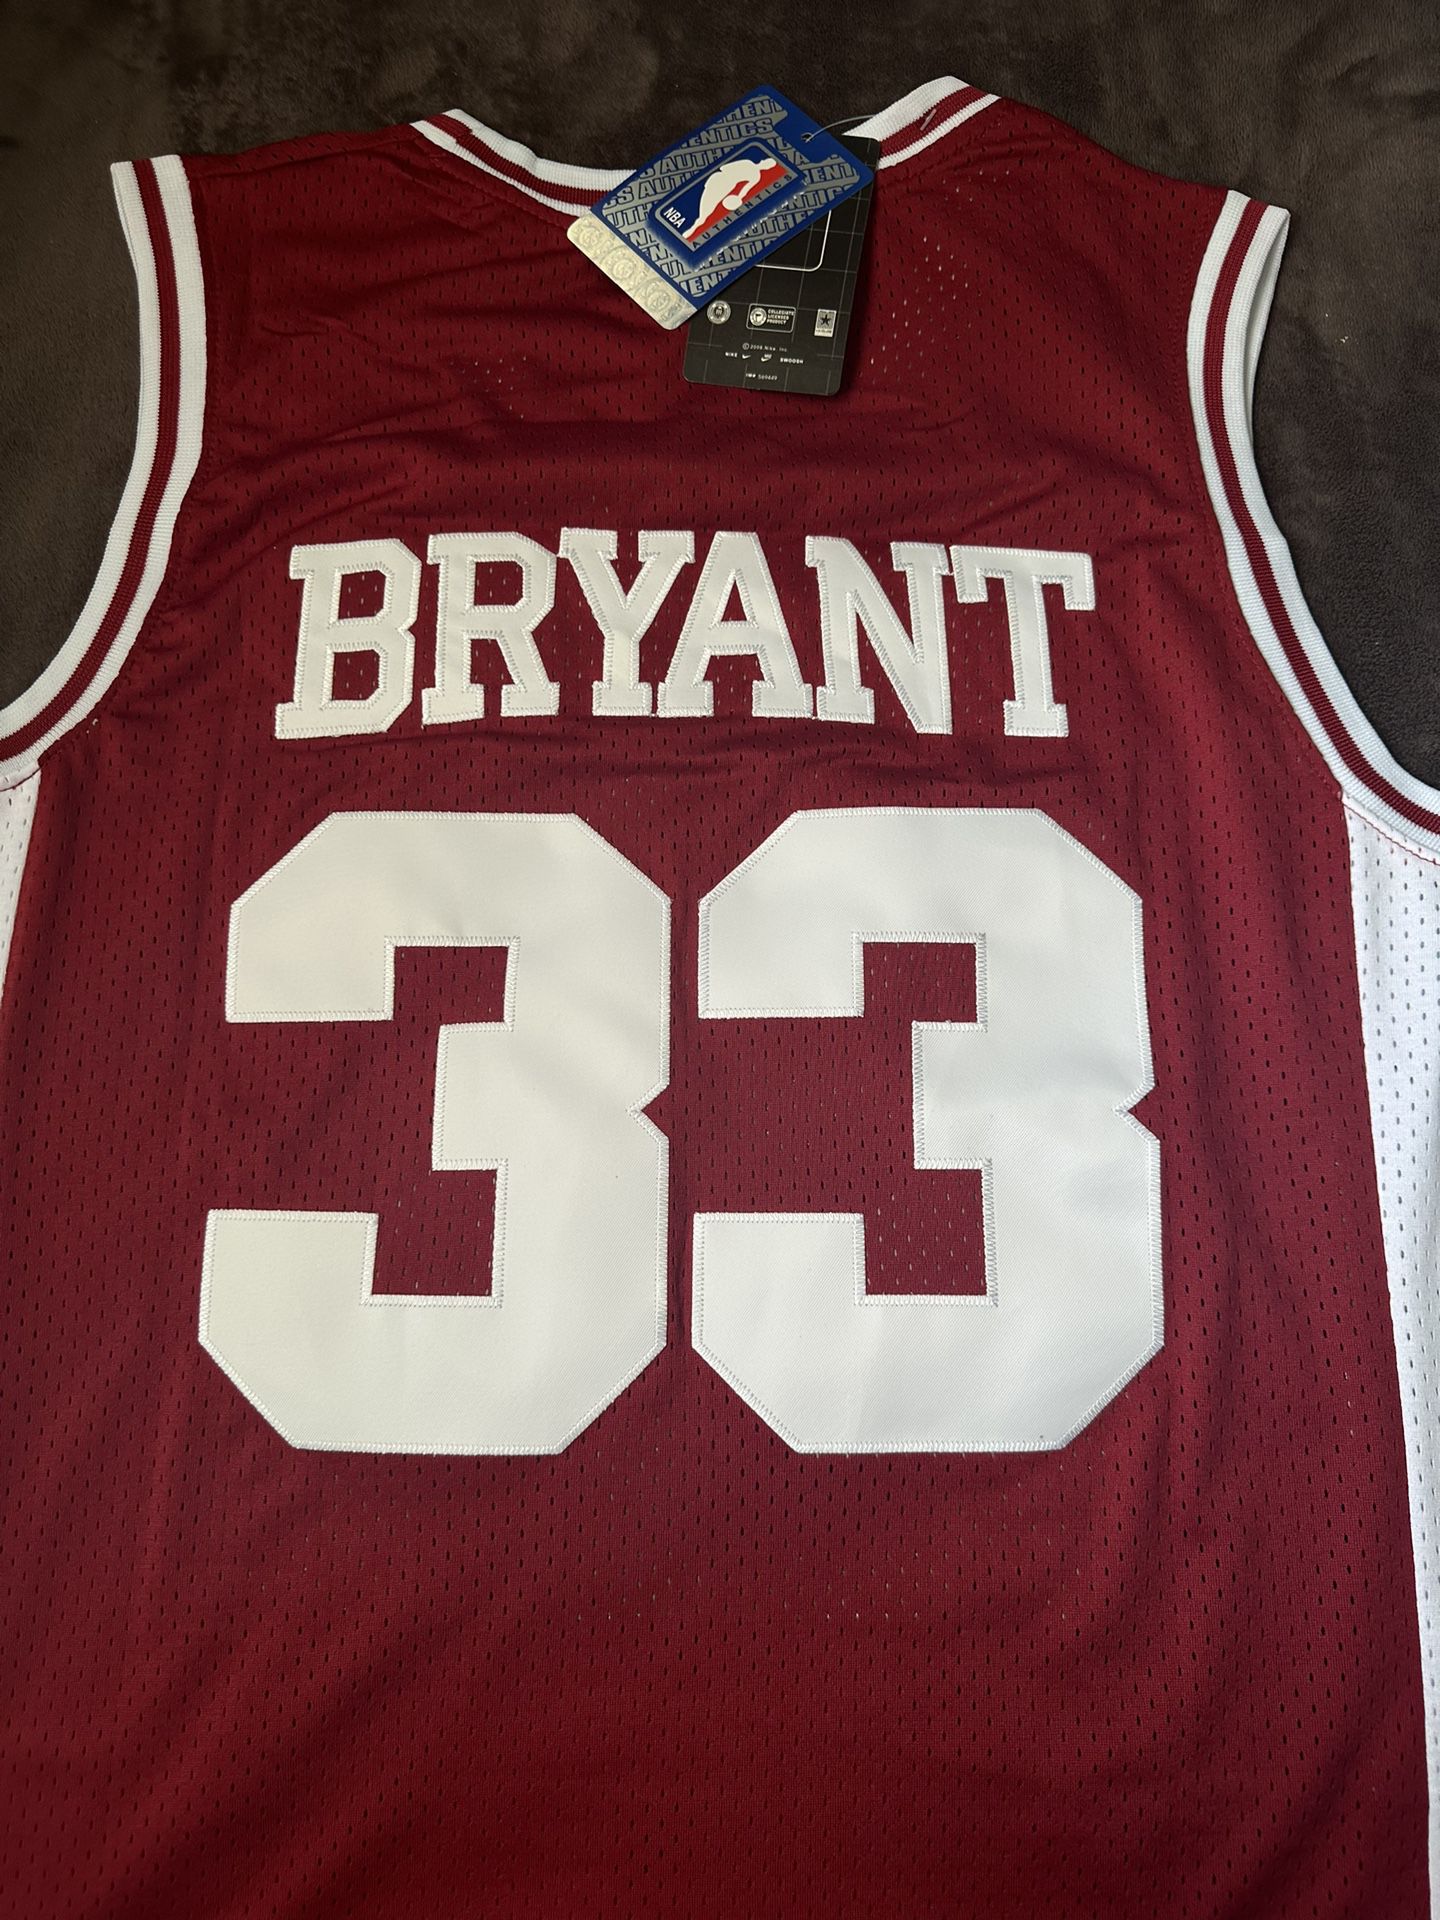 Kobe Bryant Jersey- Signed Limited Edition for Sale in Downey, CA - OfferUp